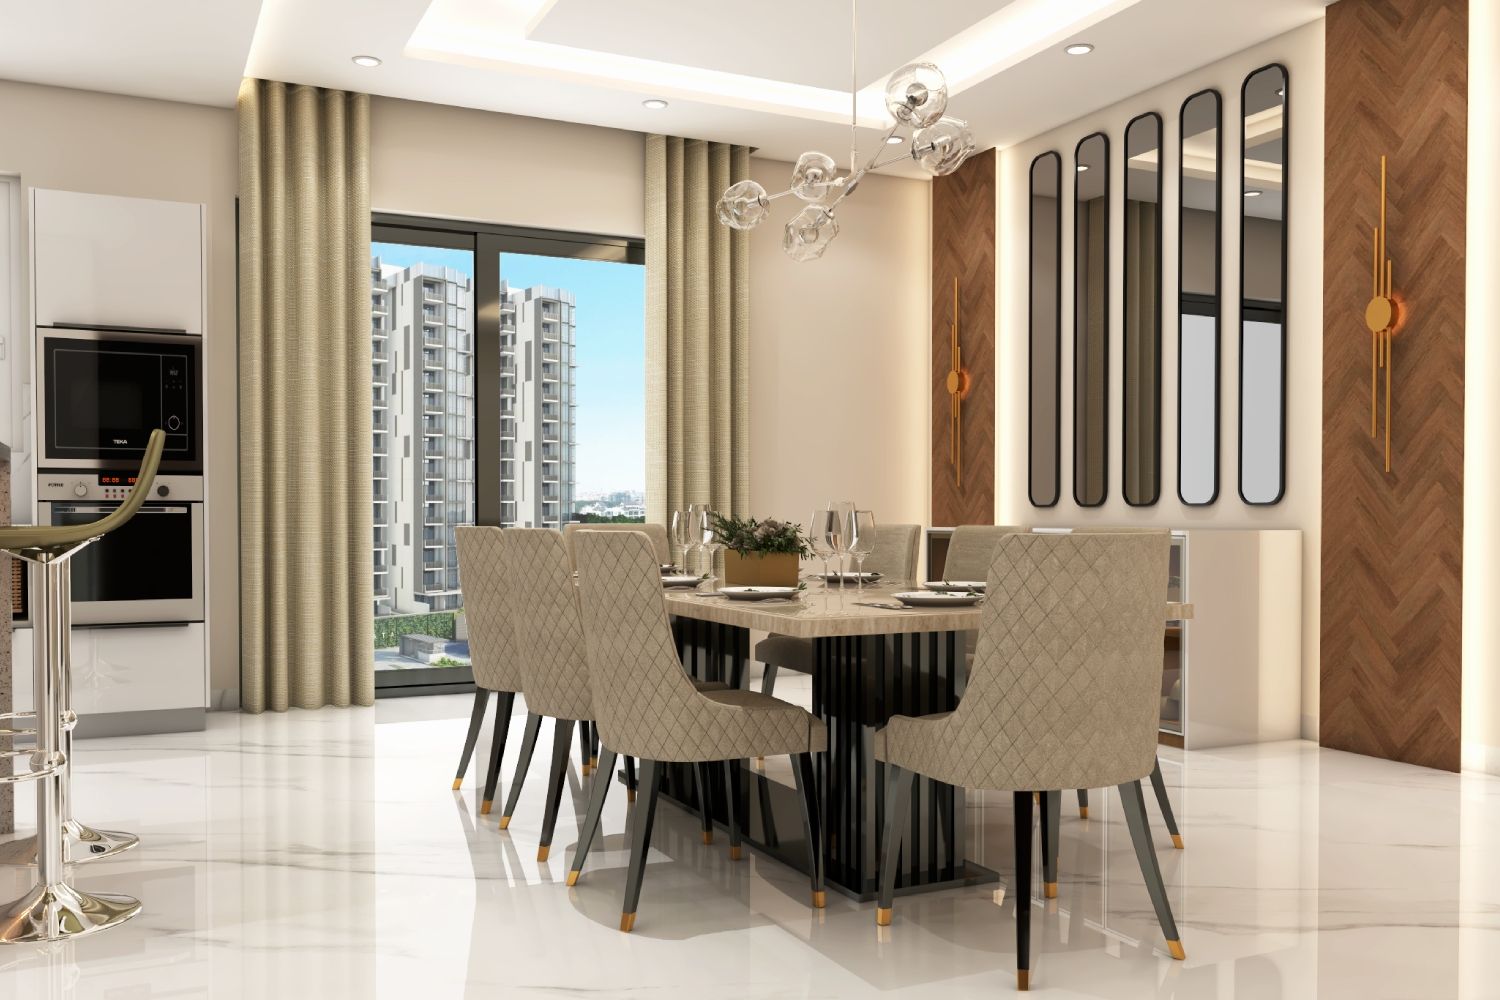 Contemporary 8-Seater Dining Room Design With Beige Tufted Chairs And Wall-Mounted Oval Mirrors